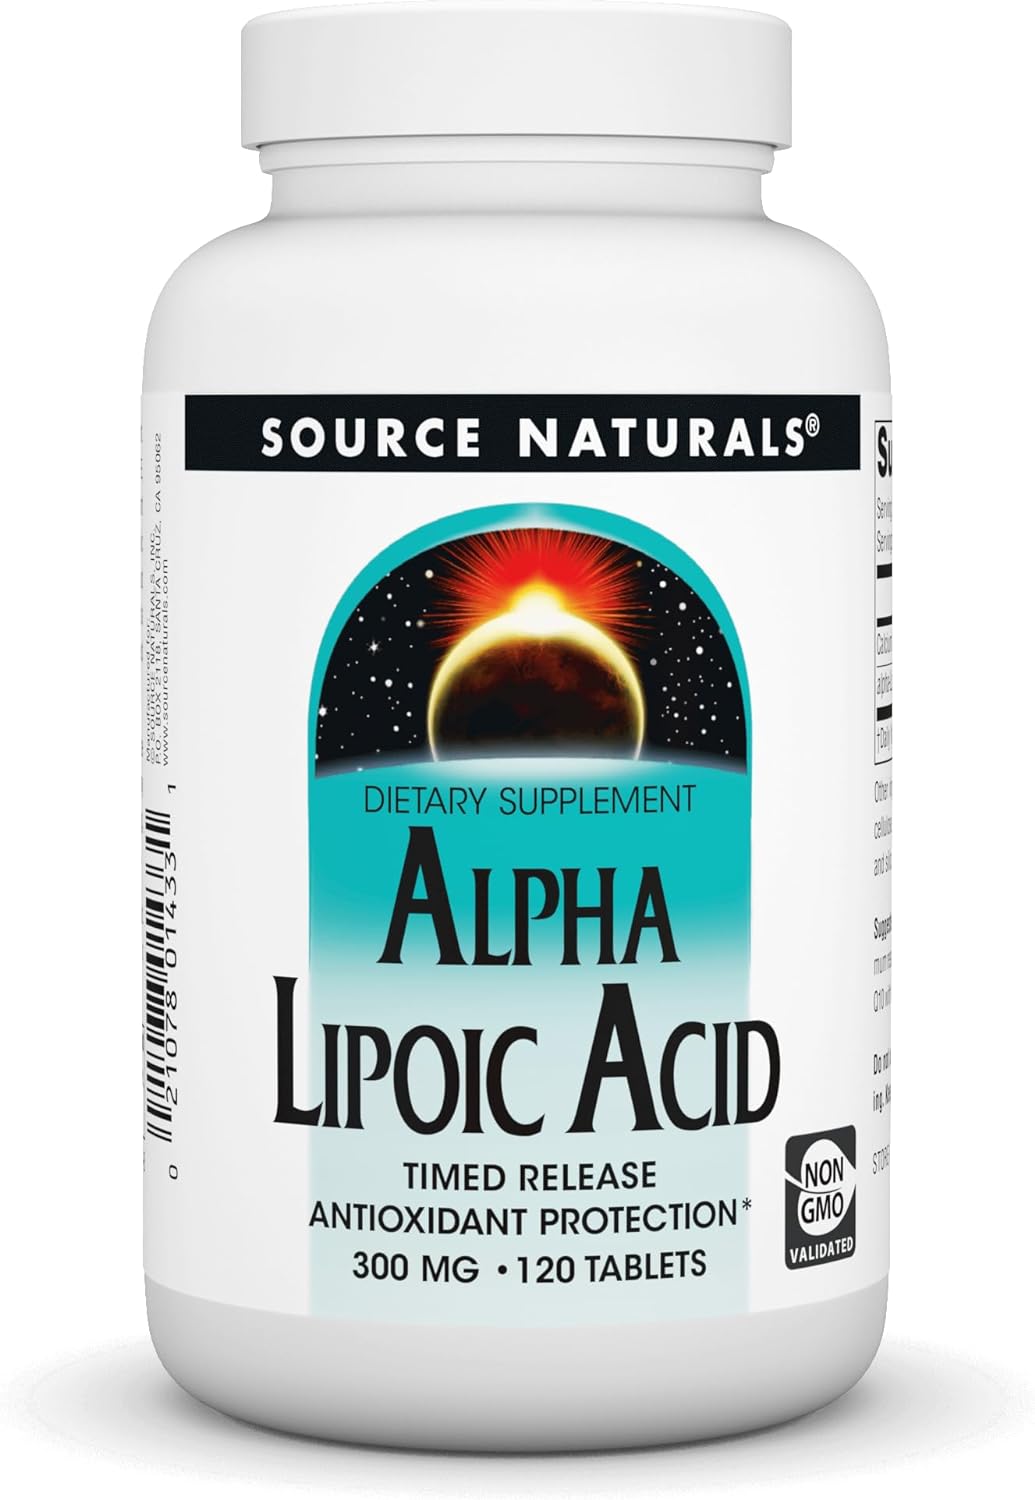 Source Naturals Alpha Lipoic Acid, Time Released Antioxidant Protection* - 120 Time Release Tablets